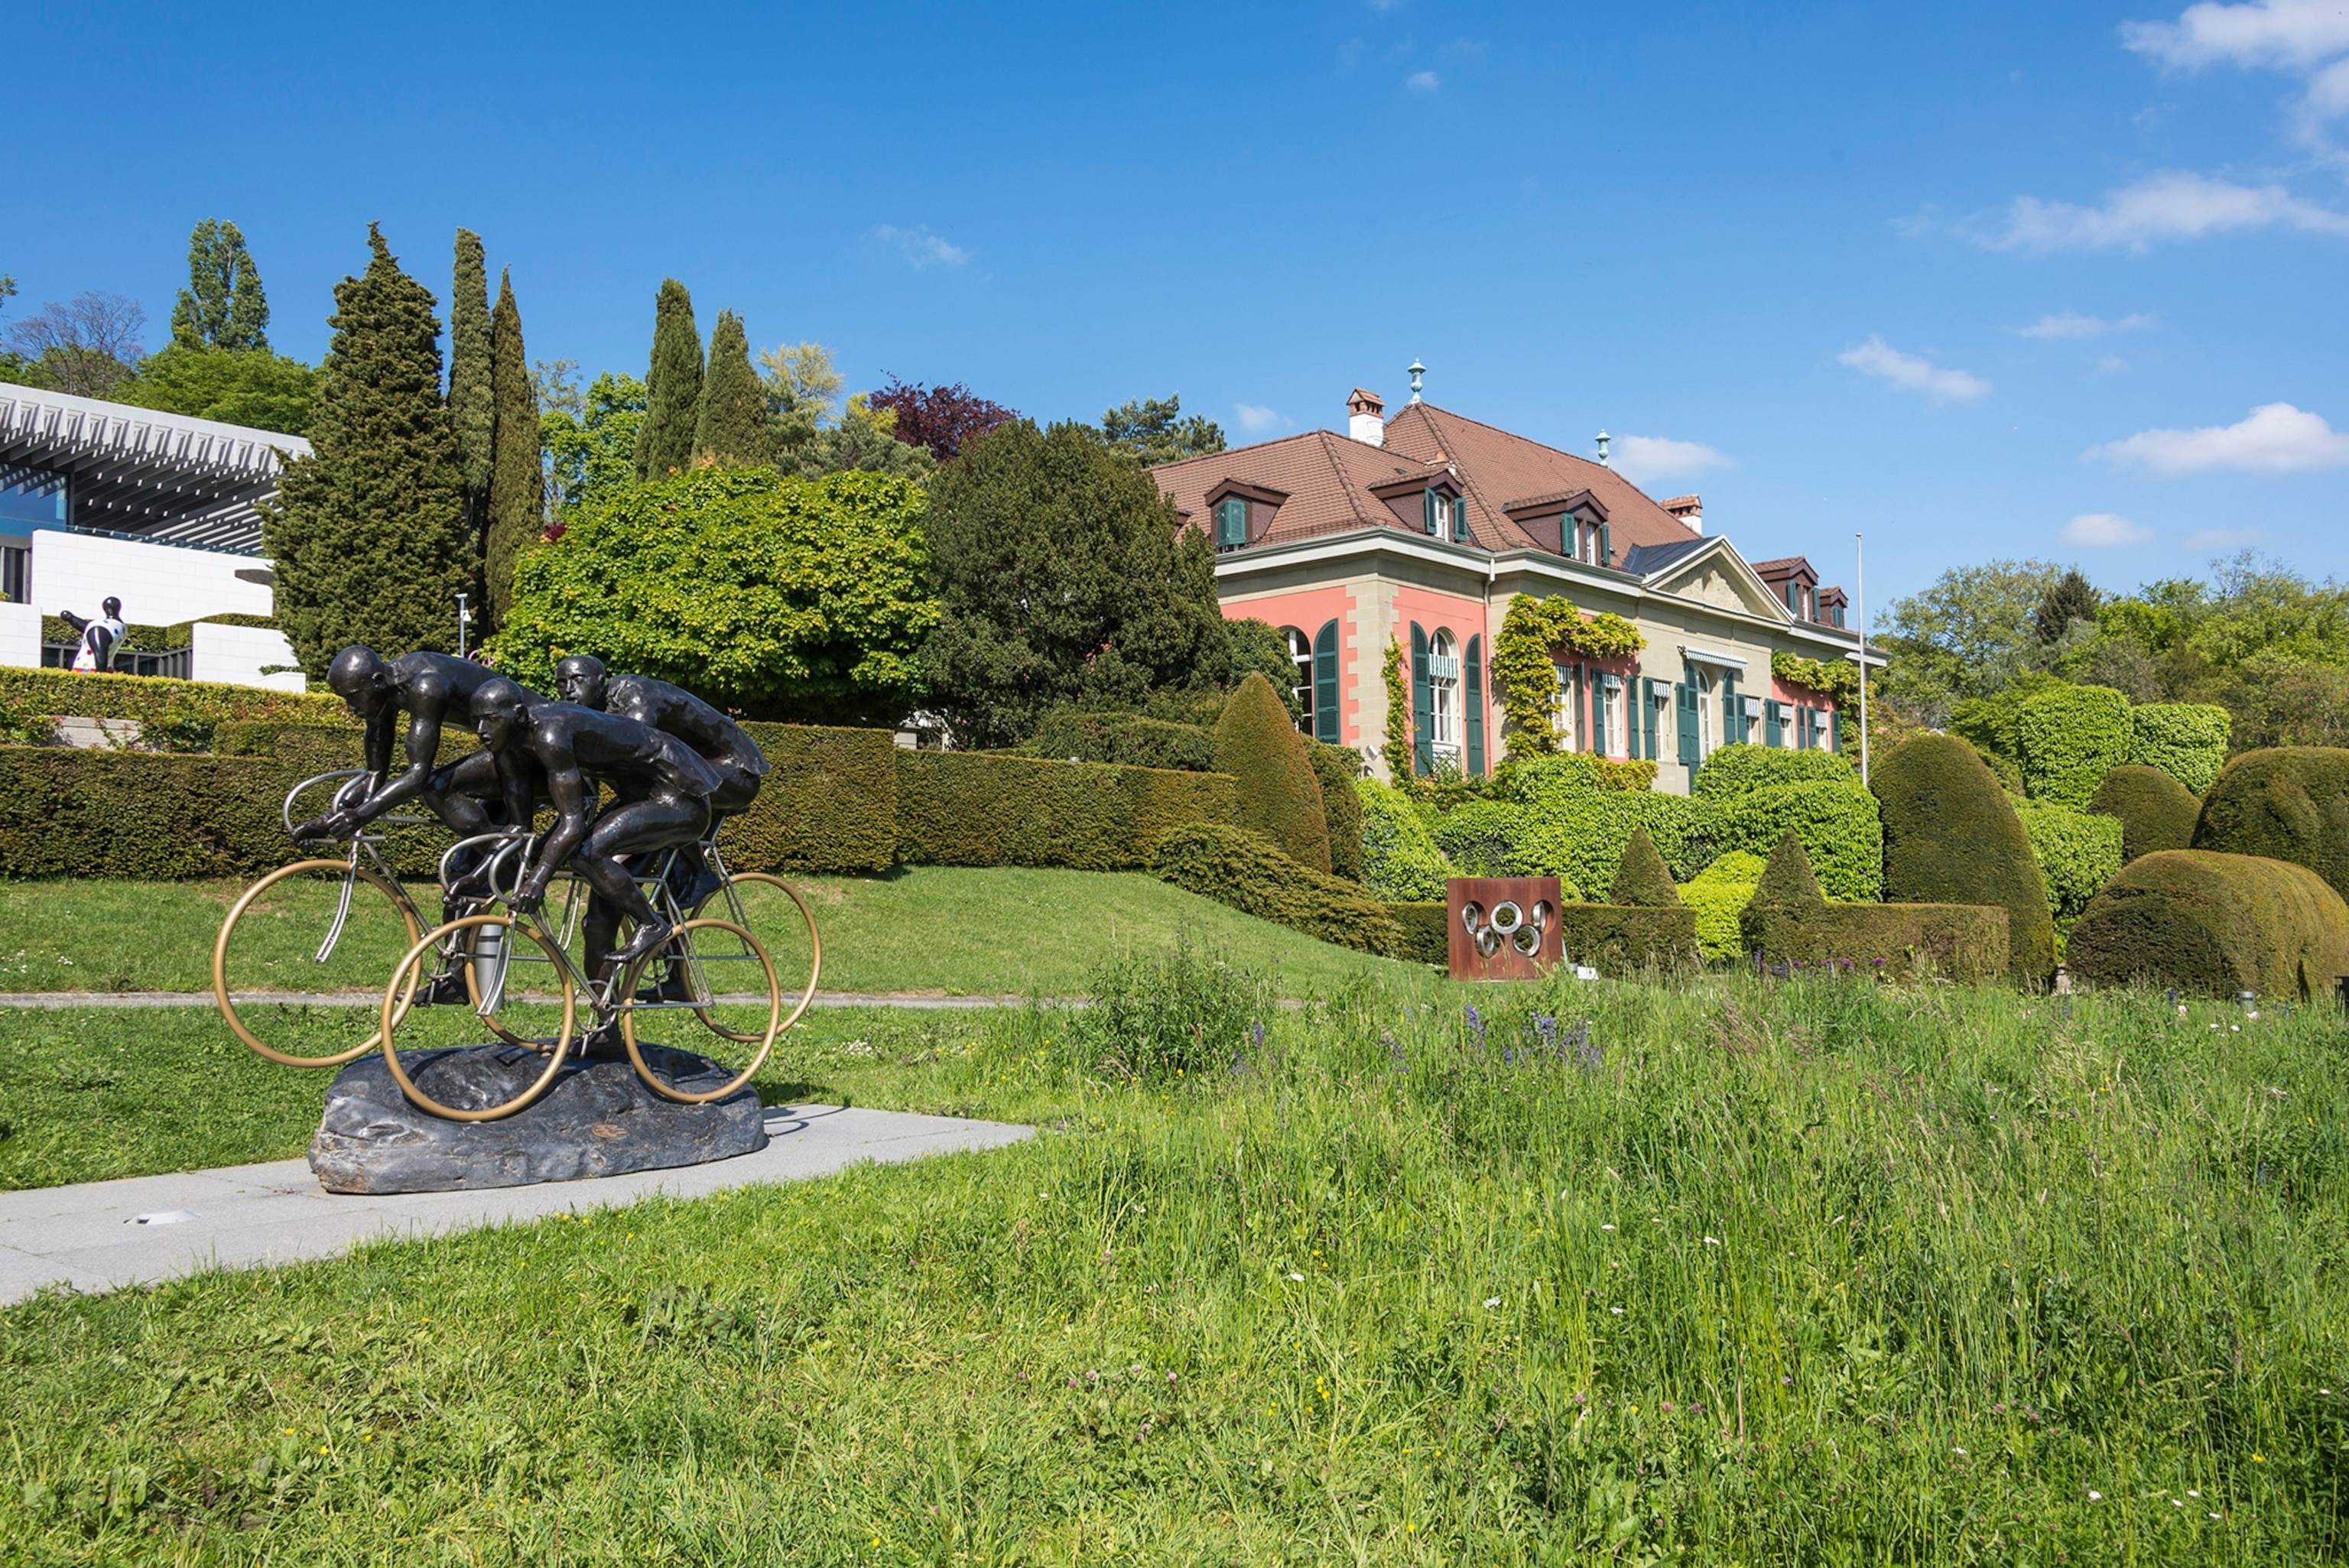 A statue of three bikers riding is surrounded by lush green landscape.